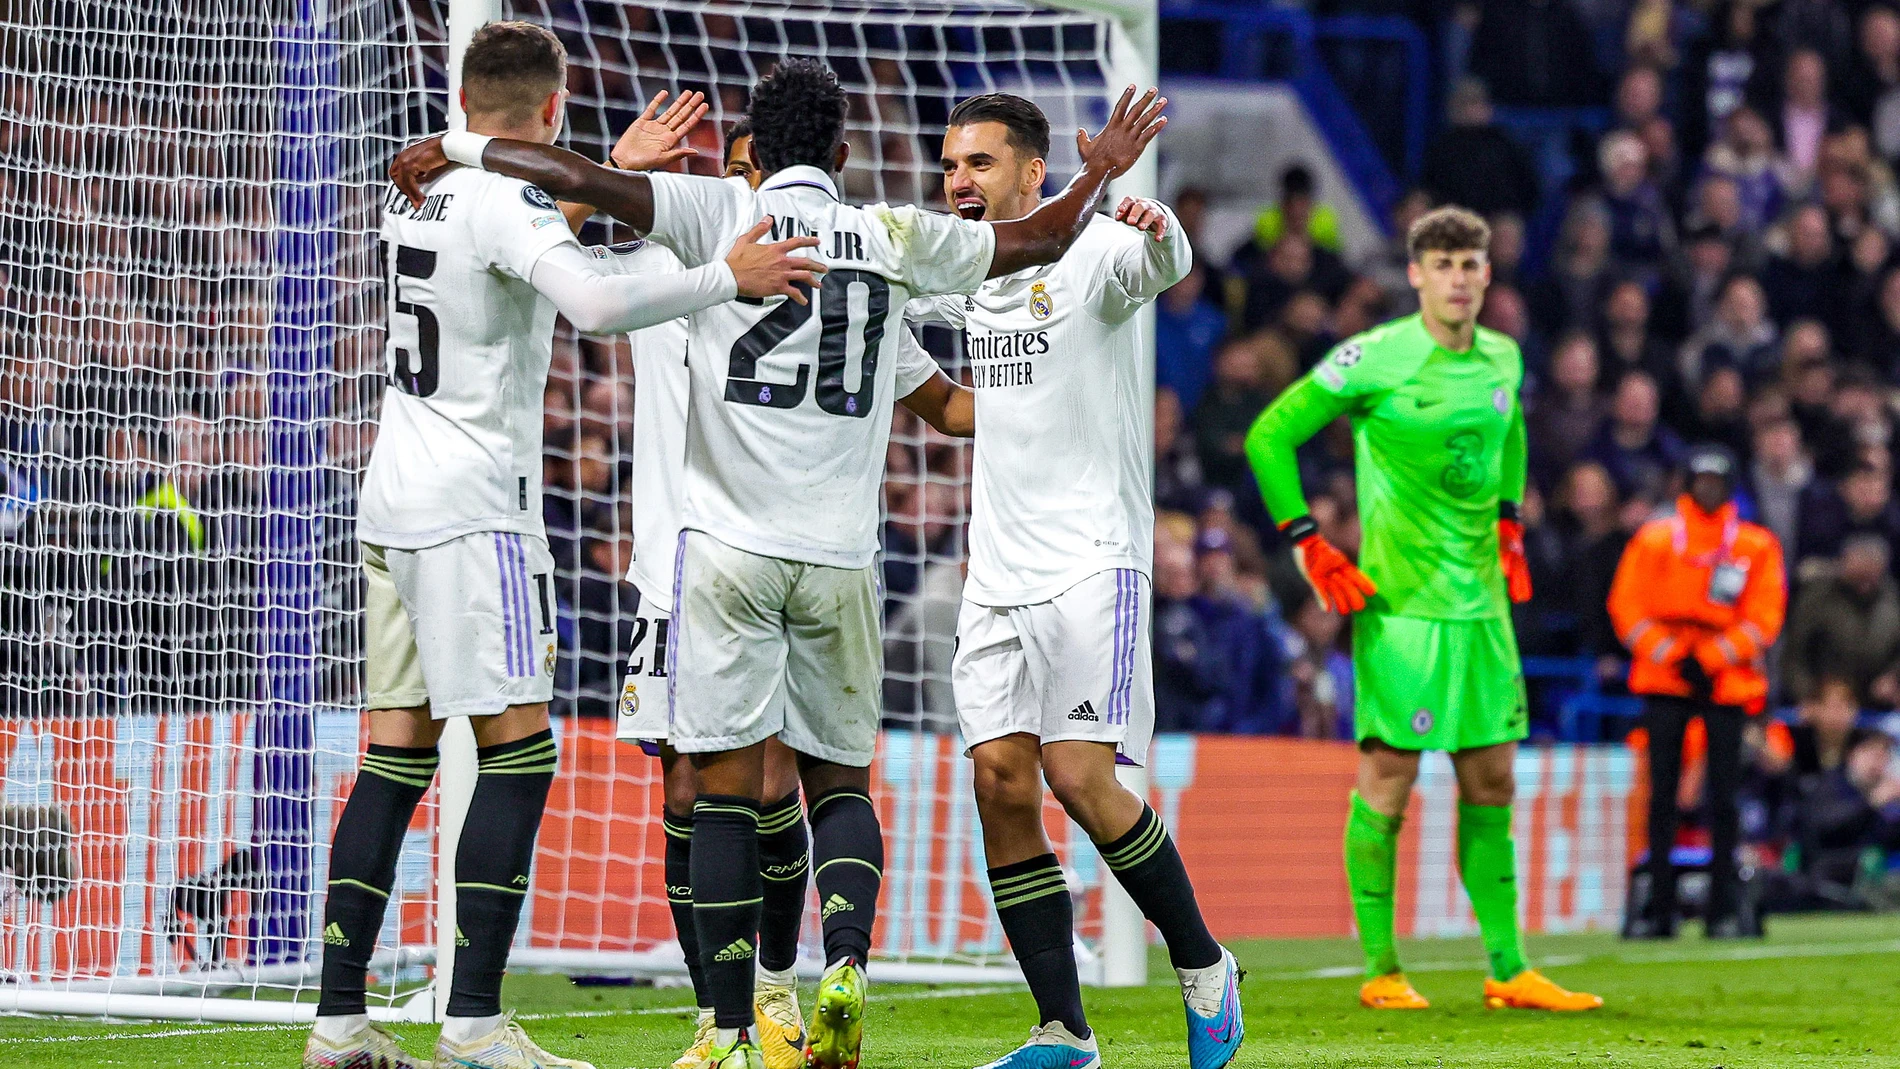 Rodrygo (21) of Real Madrid scores a goal and celebrates 0-2 with teammates during the UEFA Champions League, Quarter-finals, 2nd leg football match between Chelsea and Real Madrid on 18 April 2023 at Stamford Bridge in London, England - Photo Nigel Keene / ProSportsImages / DPPI Nigel Keene / Pro Sports Images / Afp7 18/04/2023 ONLY FOR USE IN SPAIN